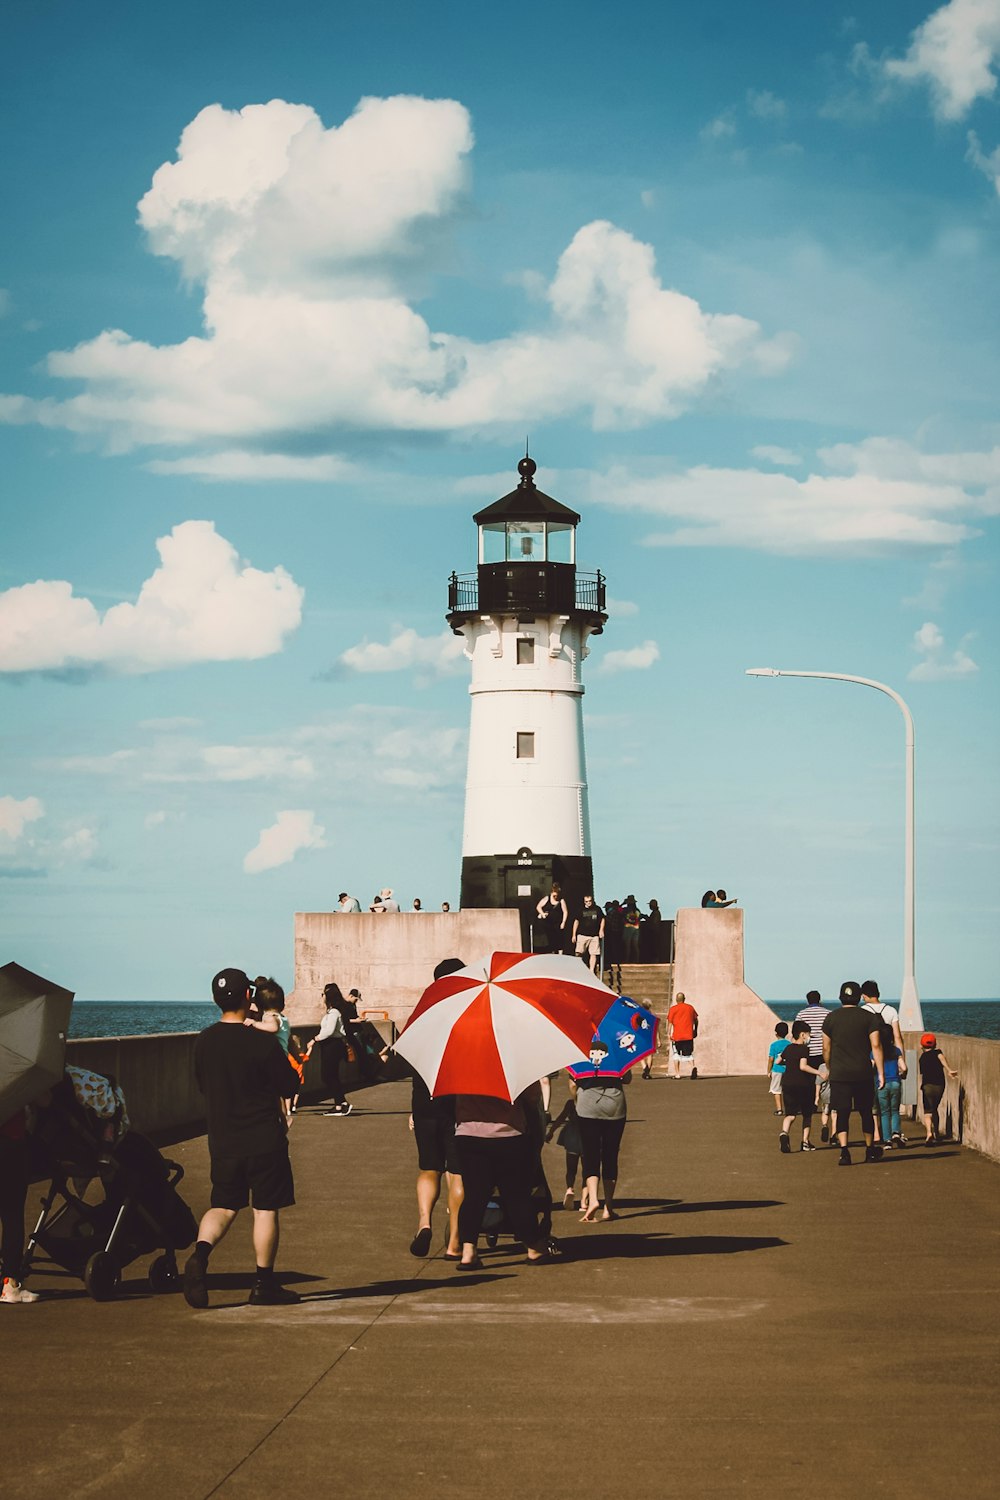 people walking near white and black lighthouse under blue and white cloudy sky during daytime